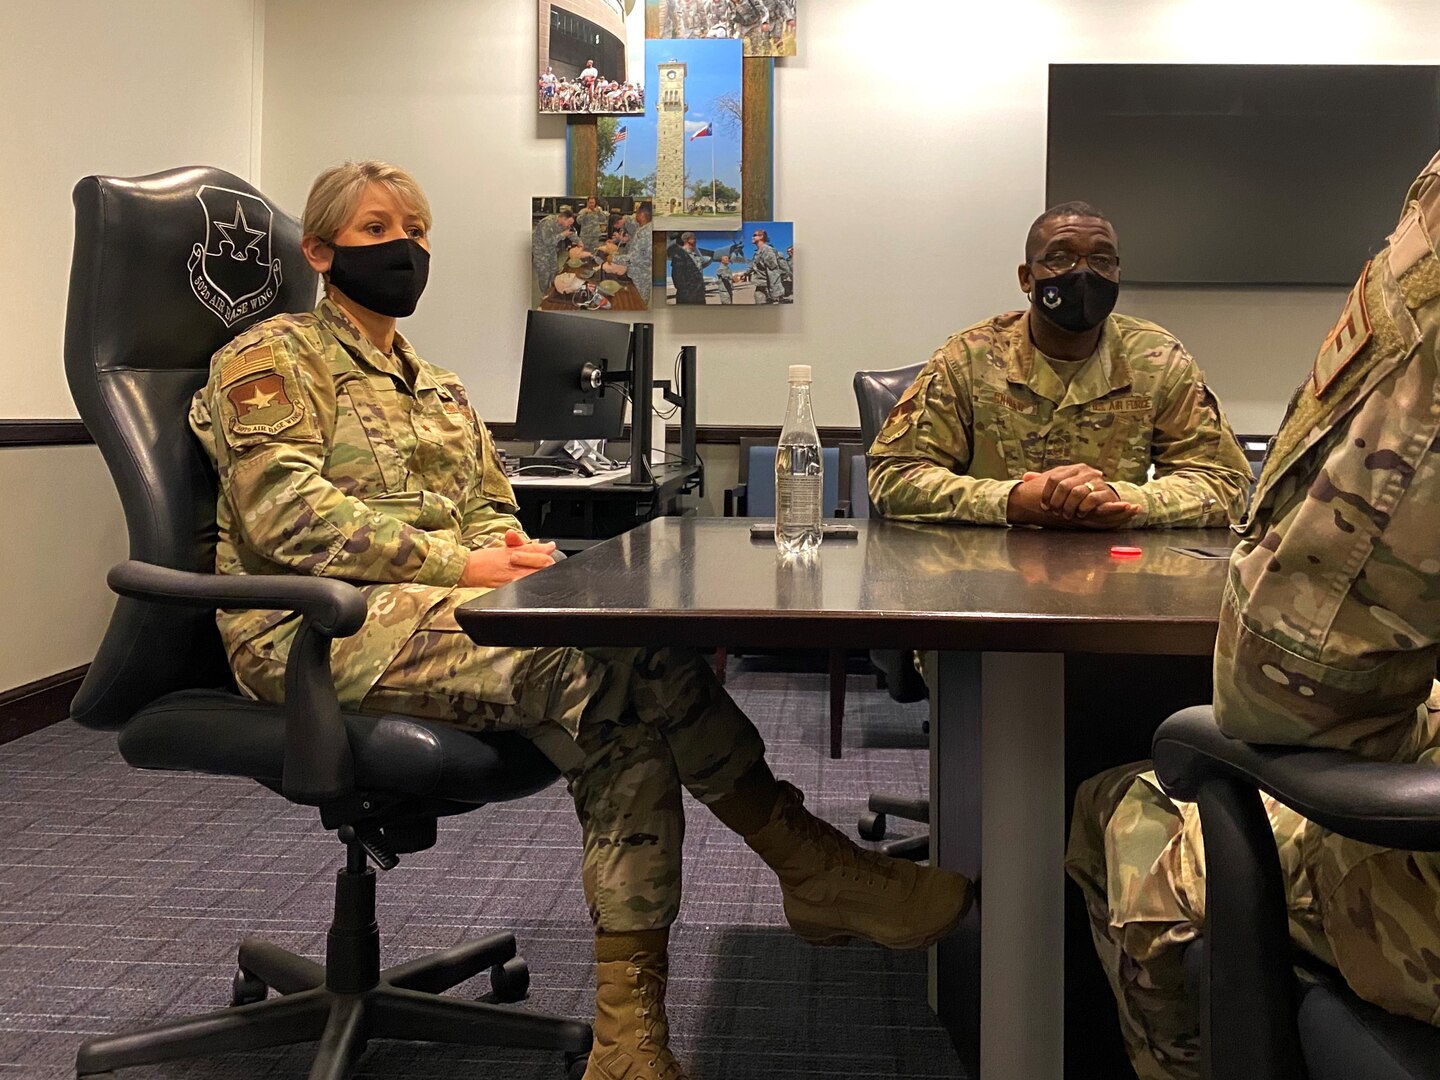 Brig. Gen. Caroline M. Miller, 502d Air Base Wing and Joint Base San Antonio commander, and Command Chief Master Sgt. Wendell Snider discuss Black History Month and the culture at JBSA during their Tough Conversation discussion Feb. 23 at JBSA-Fort Sam Houston.